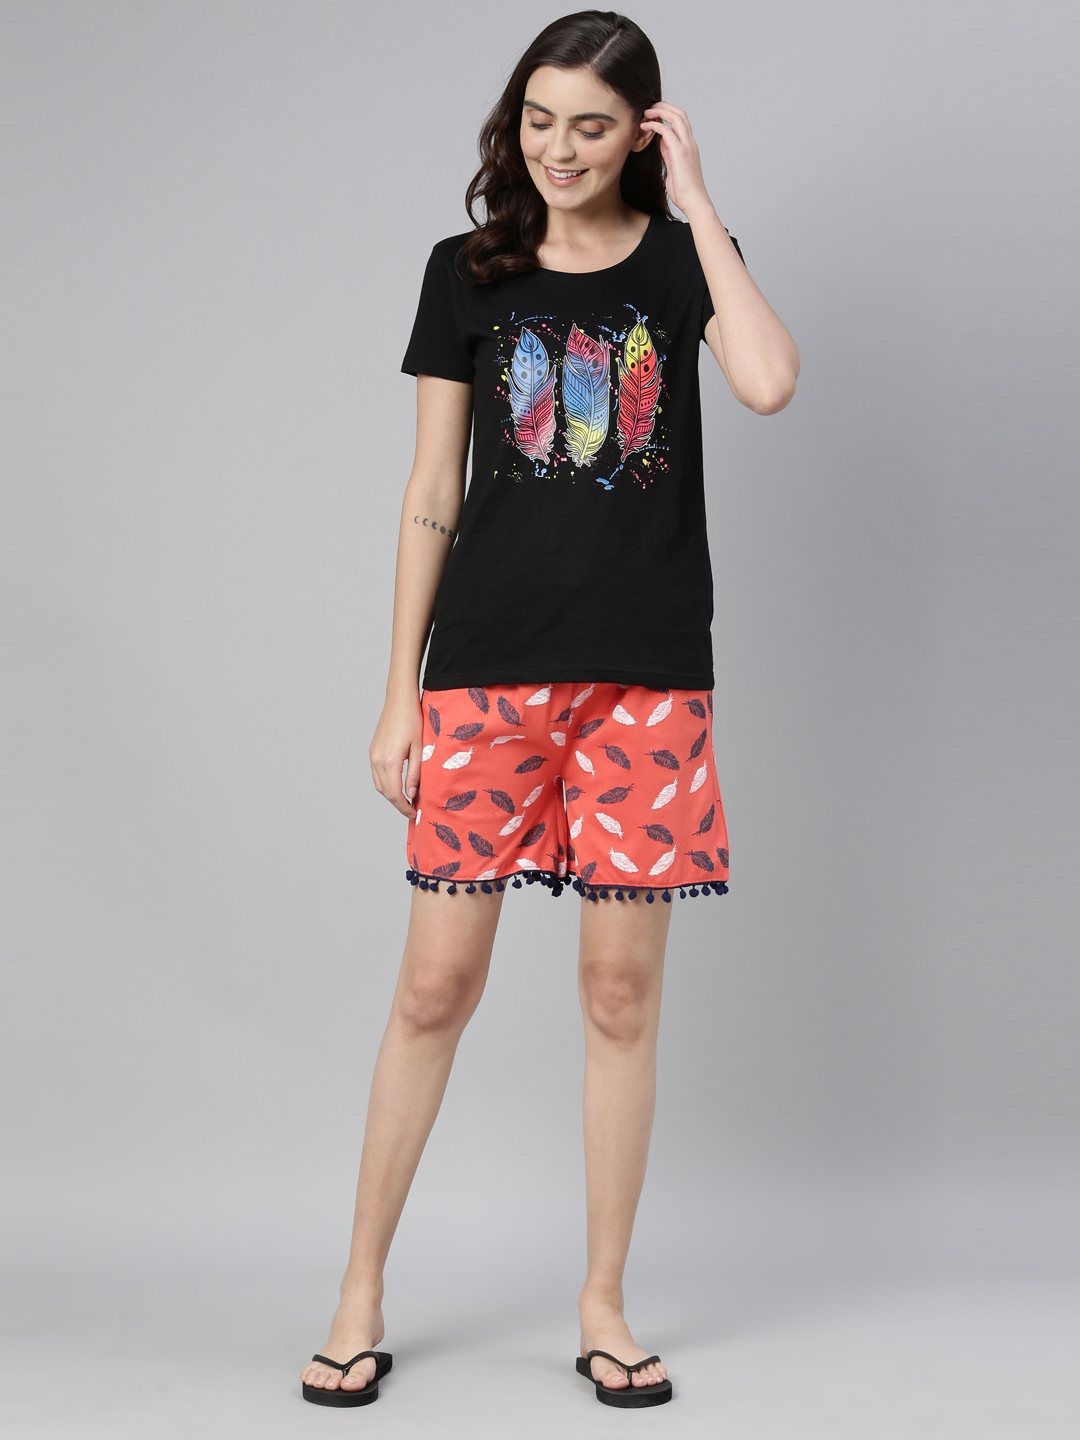 Kryptic | Kryptic Women's 100% Cotton Printed Shorts - Pack of 2 6